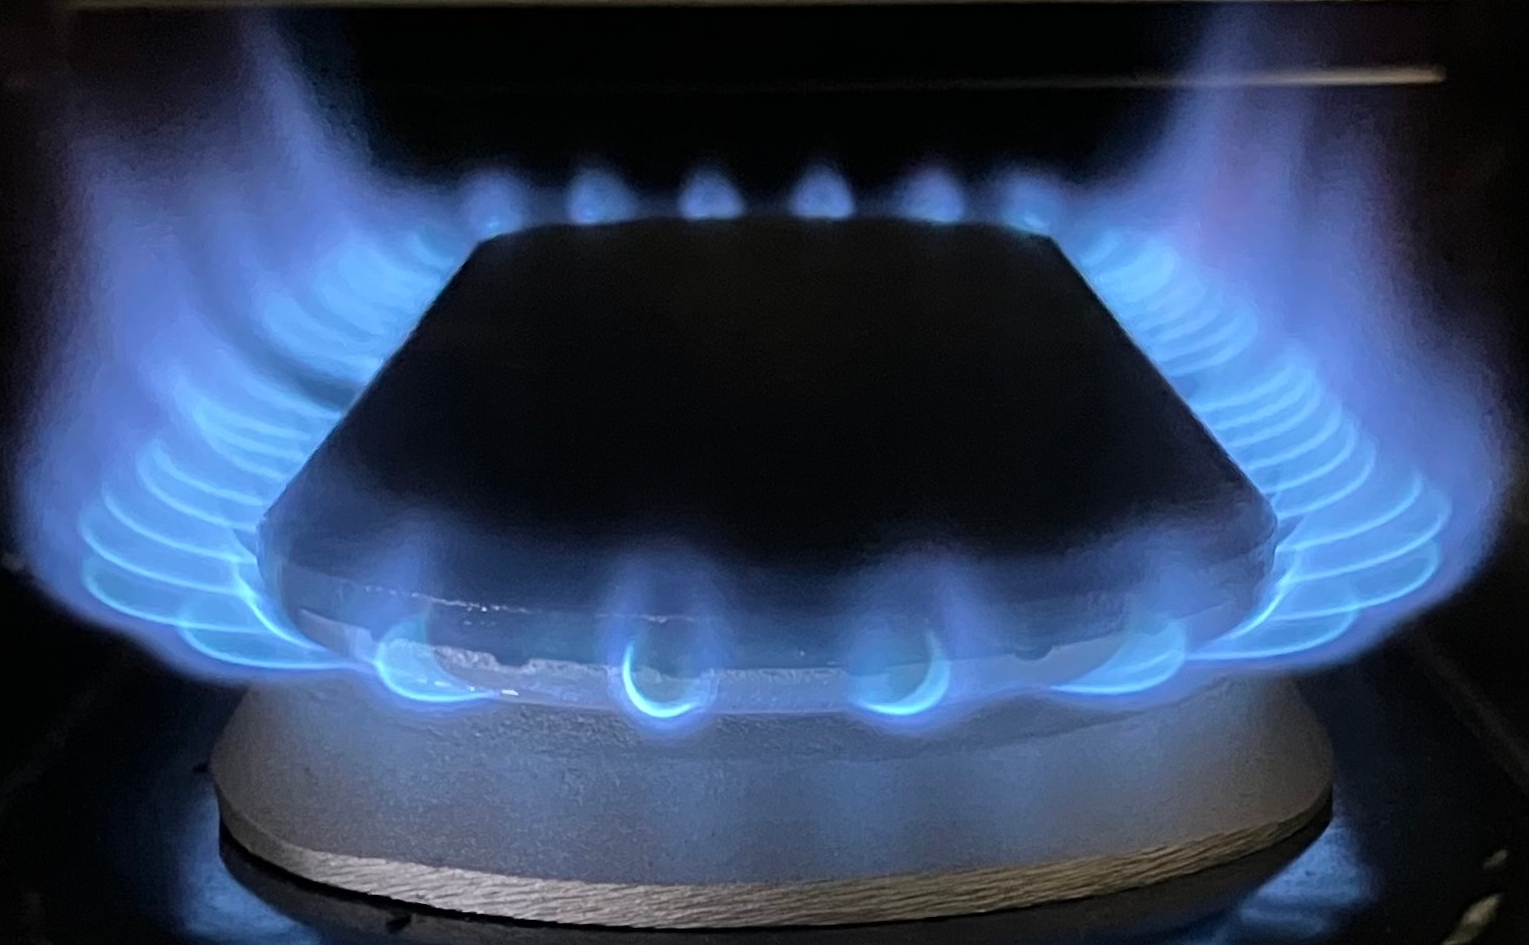 N.J. moving away from gas. But does that mean they’re coming for your stove?